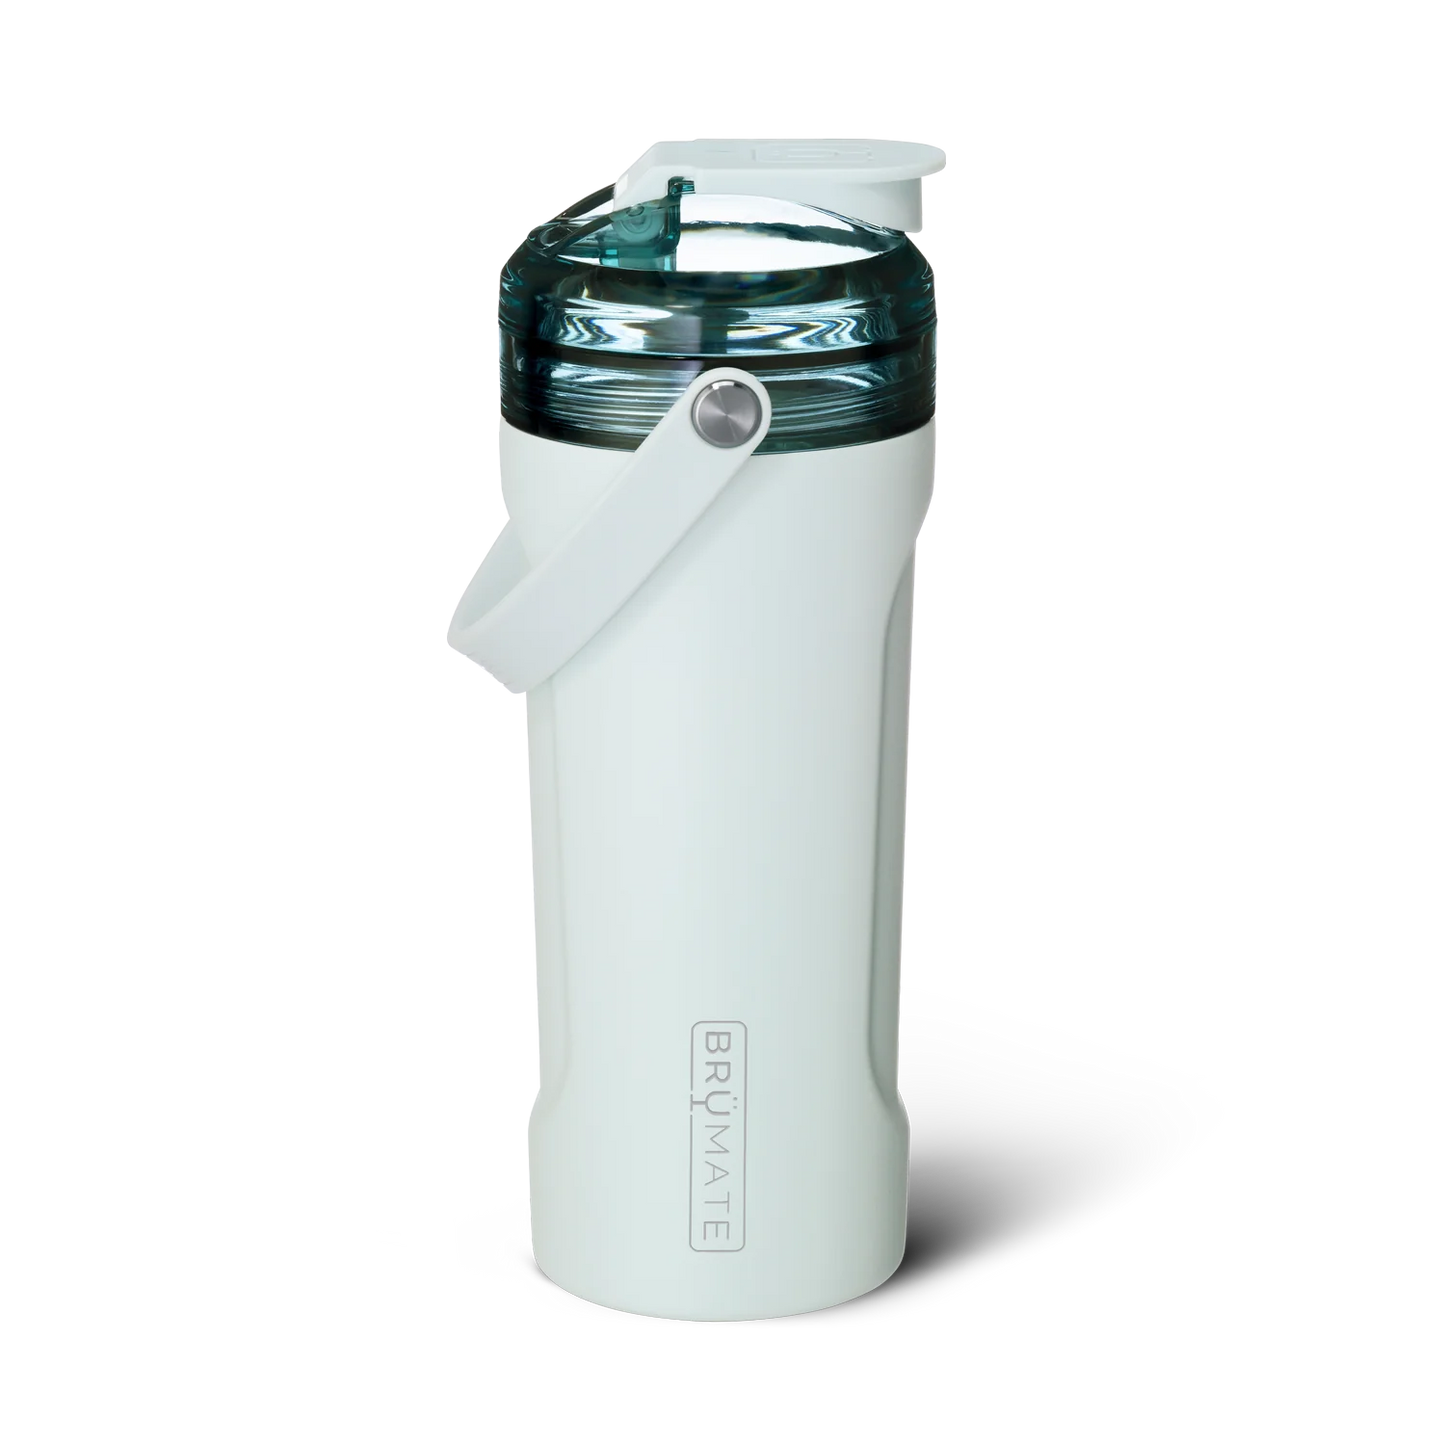 The MultiShaker is made for elevating your fitness journey. Our built-in patent-pending agitator blends your shakes, greens, and powders without any clumps, while also serving as a water infuser for herbs and fruits. It includes our BevGuard™ insulation to keep ice for 24+ hours, a spill-proof MagFlip™ lid, volume markings on the inside, a durable silicone handle, a non-slip base, and the ability to interchange tops with our MÜV or Straw Lids, making it perfect for any workout or adventure.(blue agave)